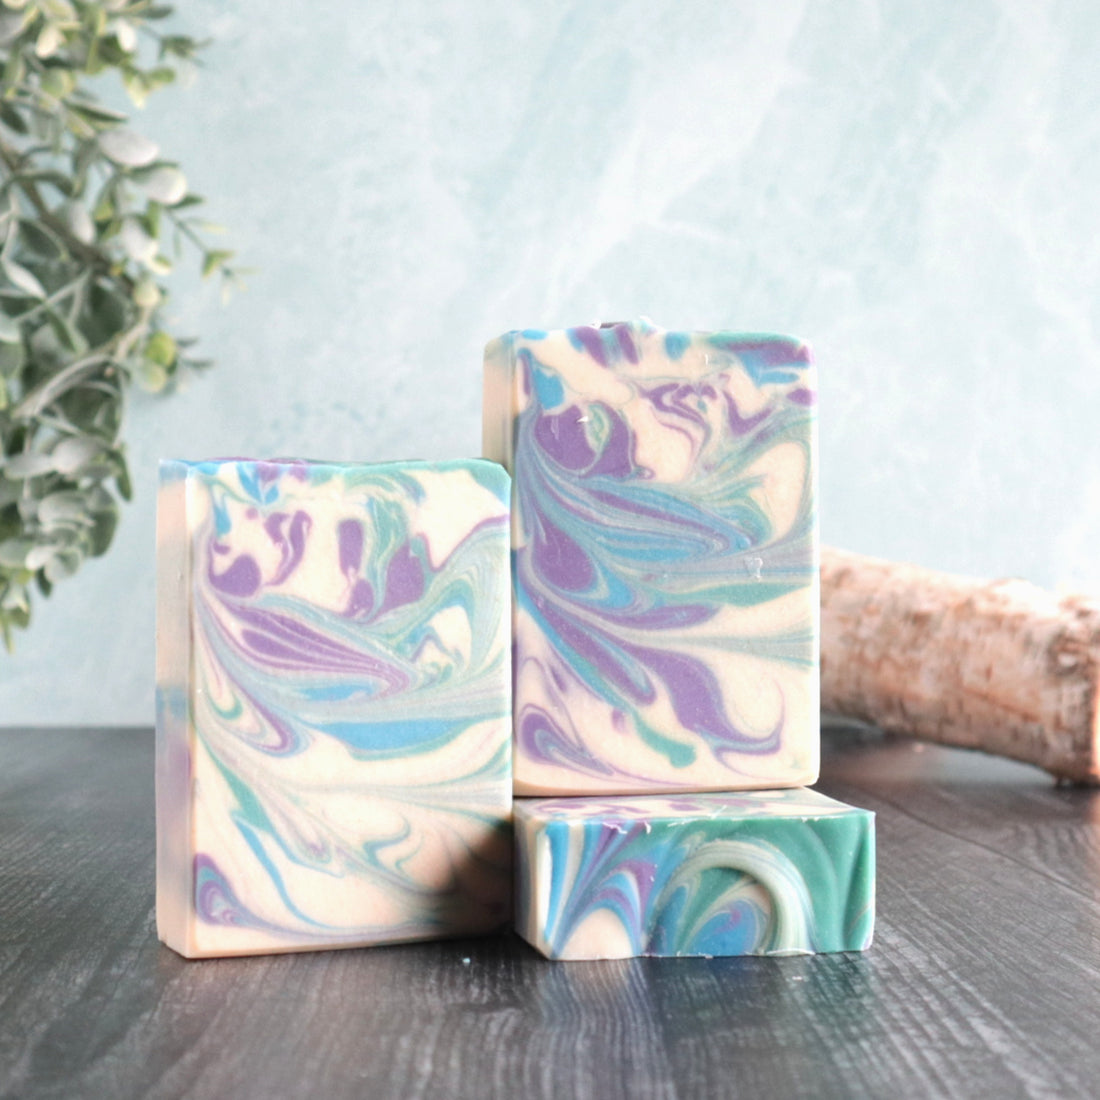 3 bars of perfectly manly soaps are pictured. The soaps have a white base with blue, green and purple swirls. There is some greenery peaking out in the left and some small logs in the back right. The background is a pretty blue-green color.